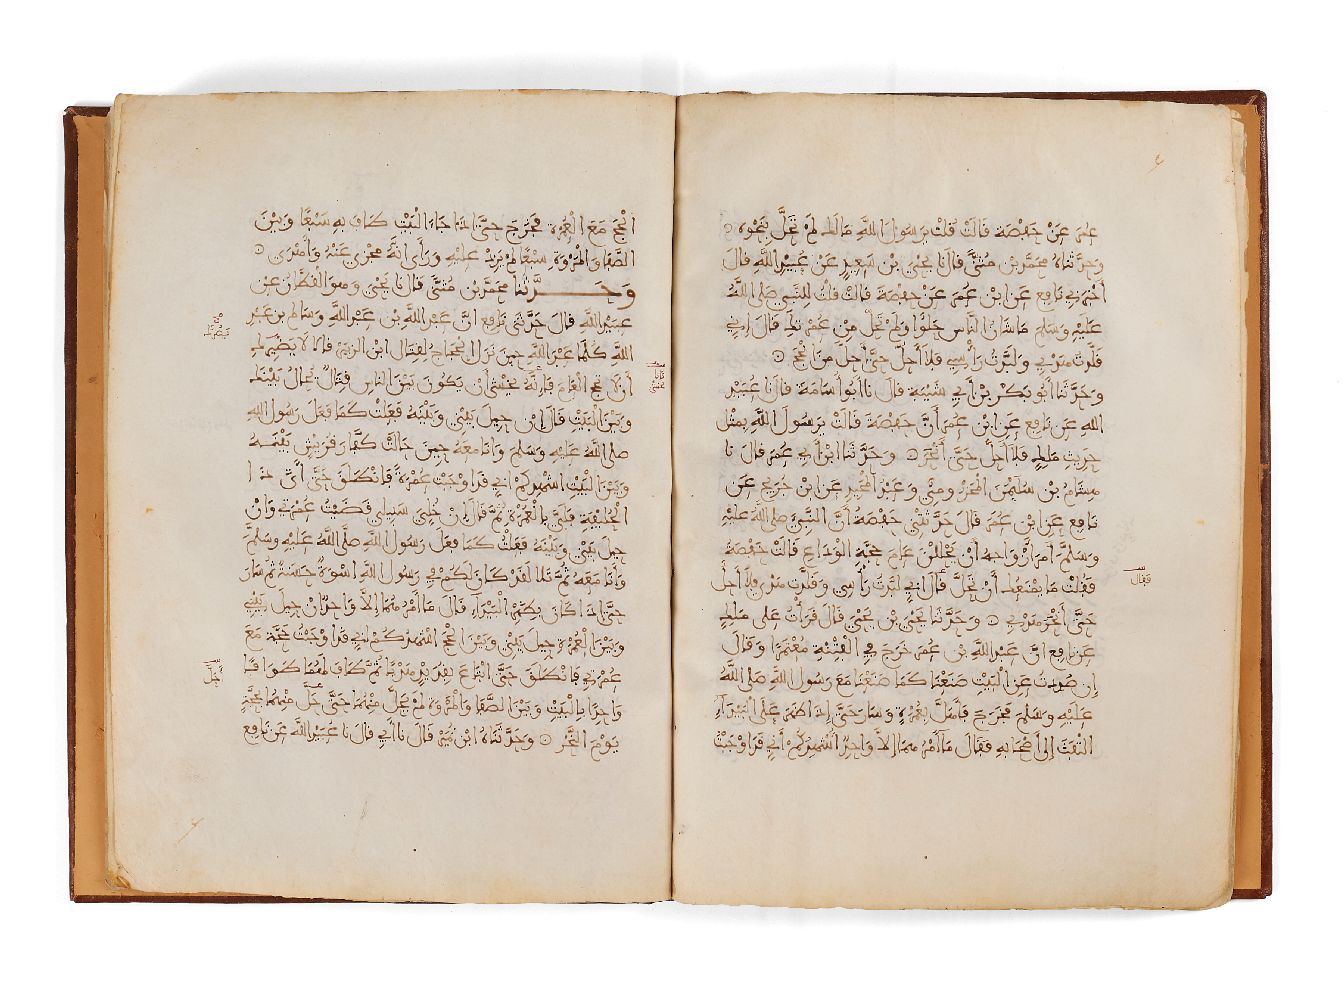 Ɵ Abu Bakr ibn al-Arabi, work of Maliki Fiqh, possibly his commentary on Tirmidh's Hadith Collection